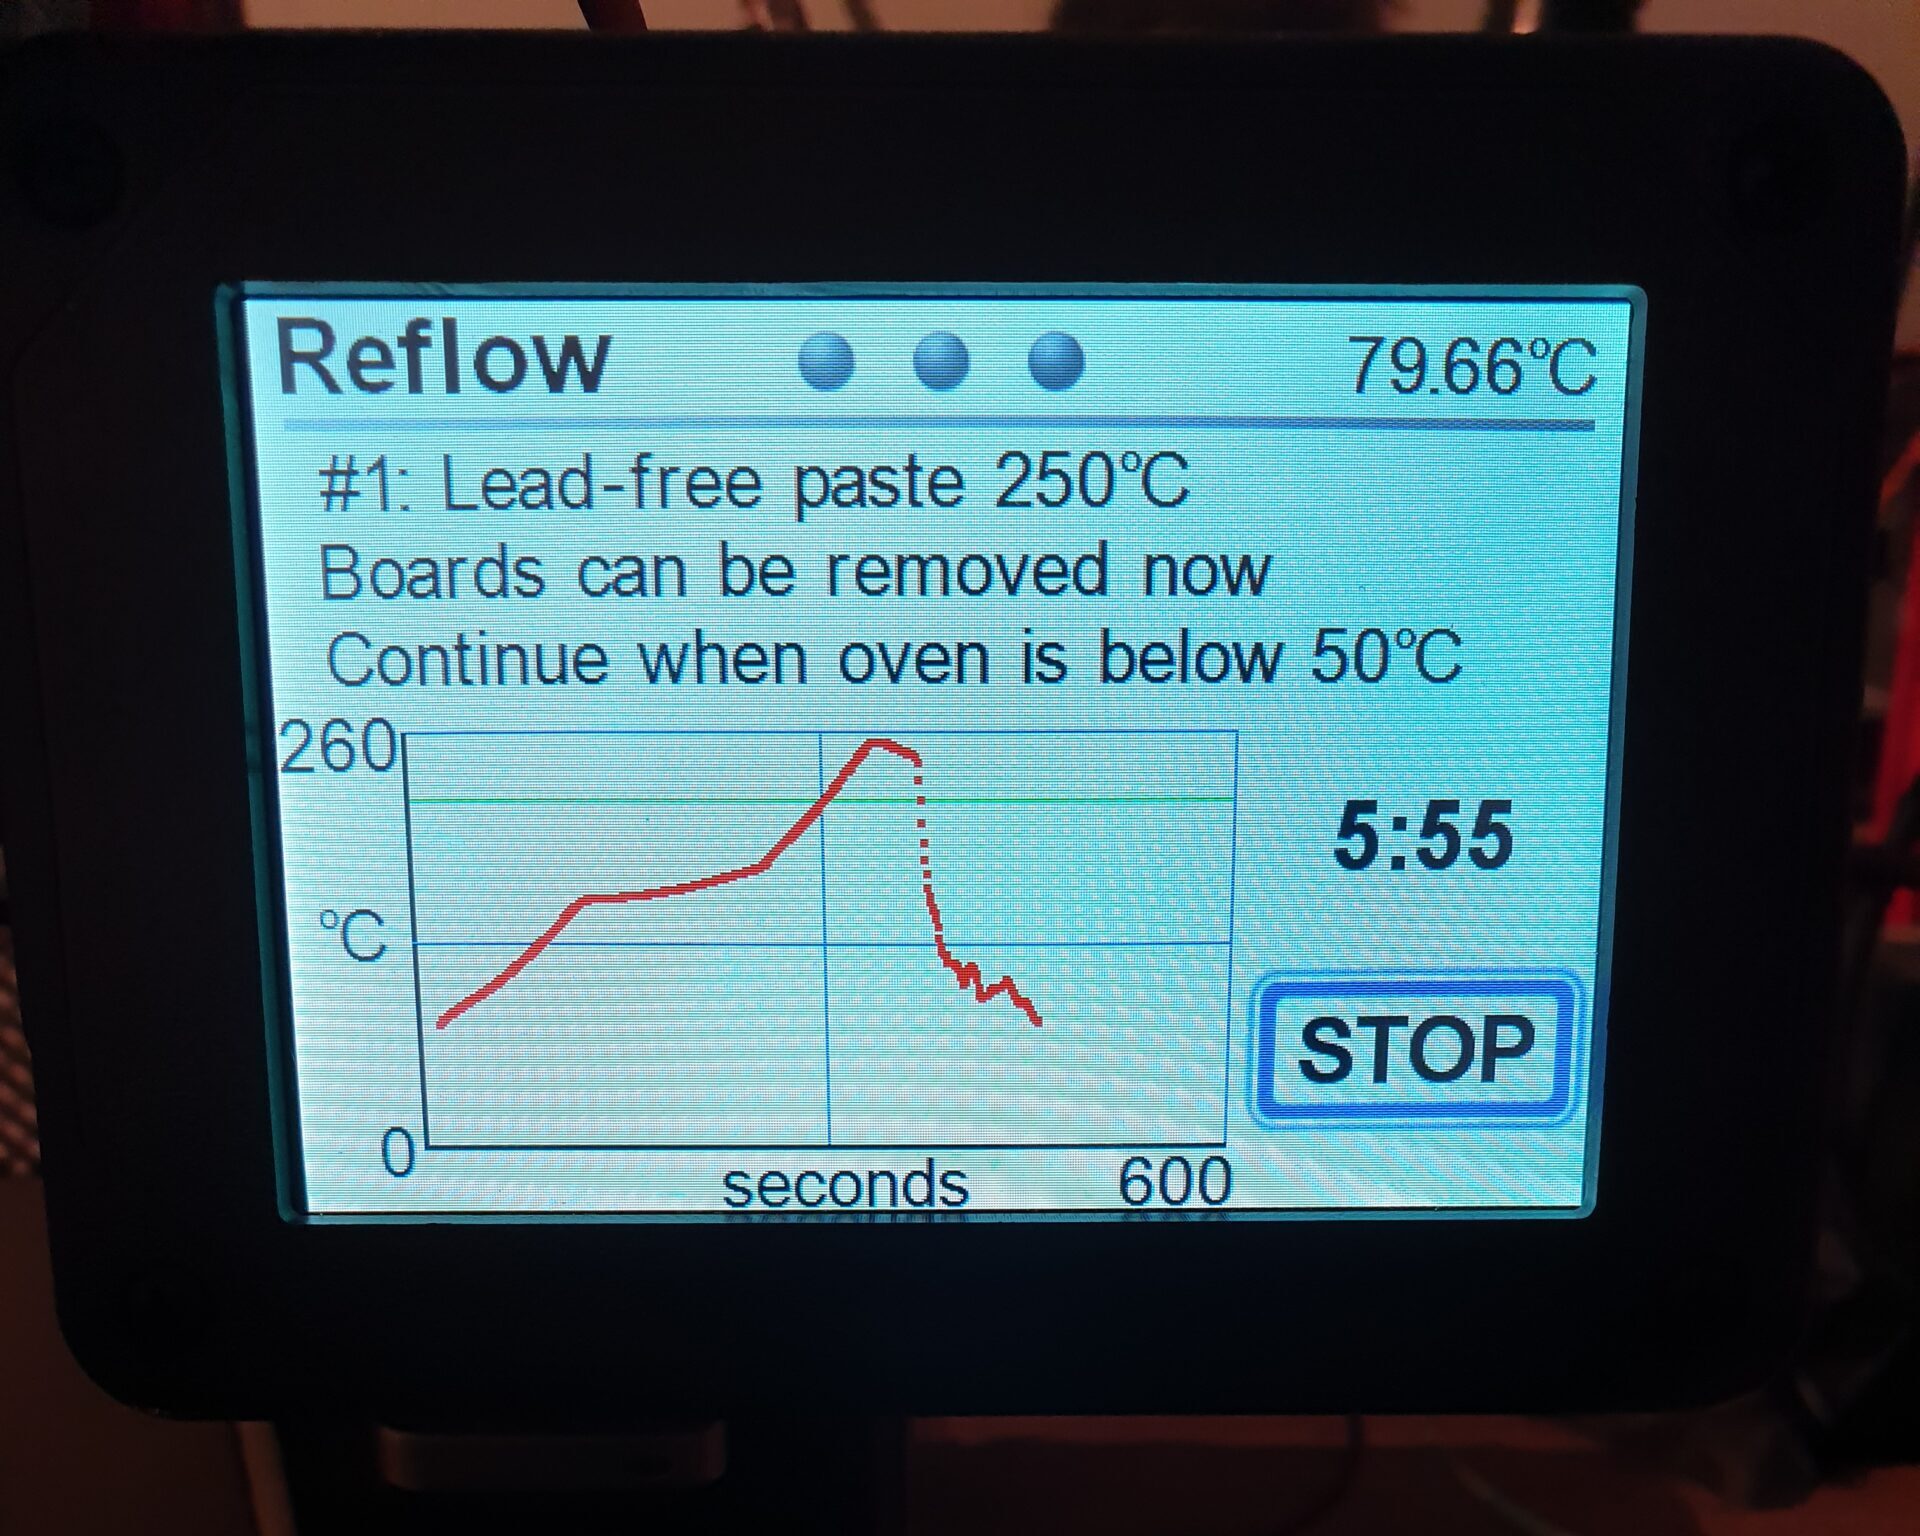 The screen of the reflow controller showing the reflow profile